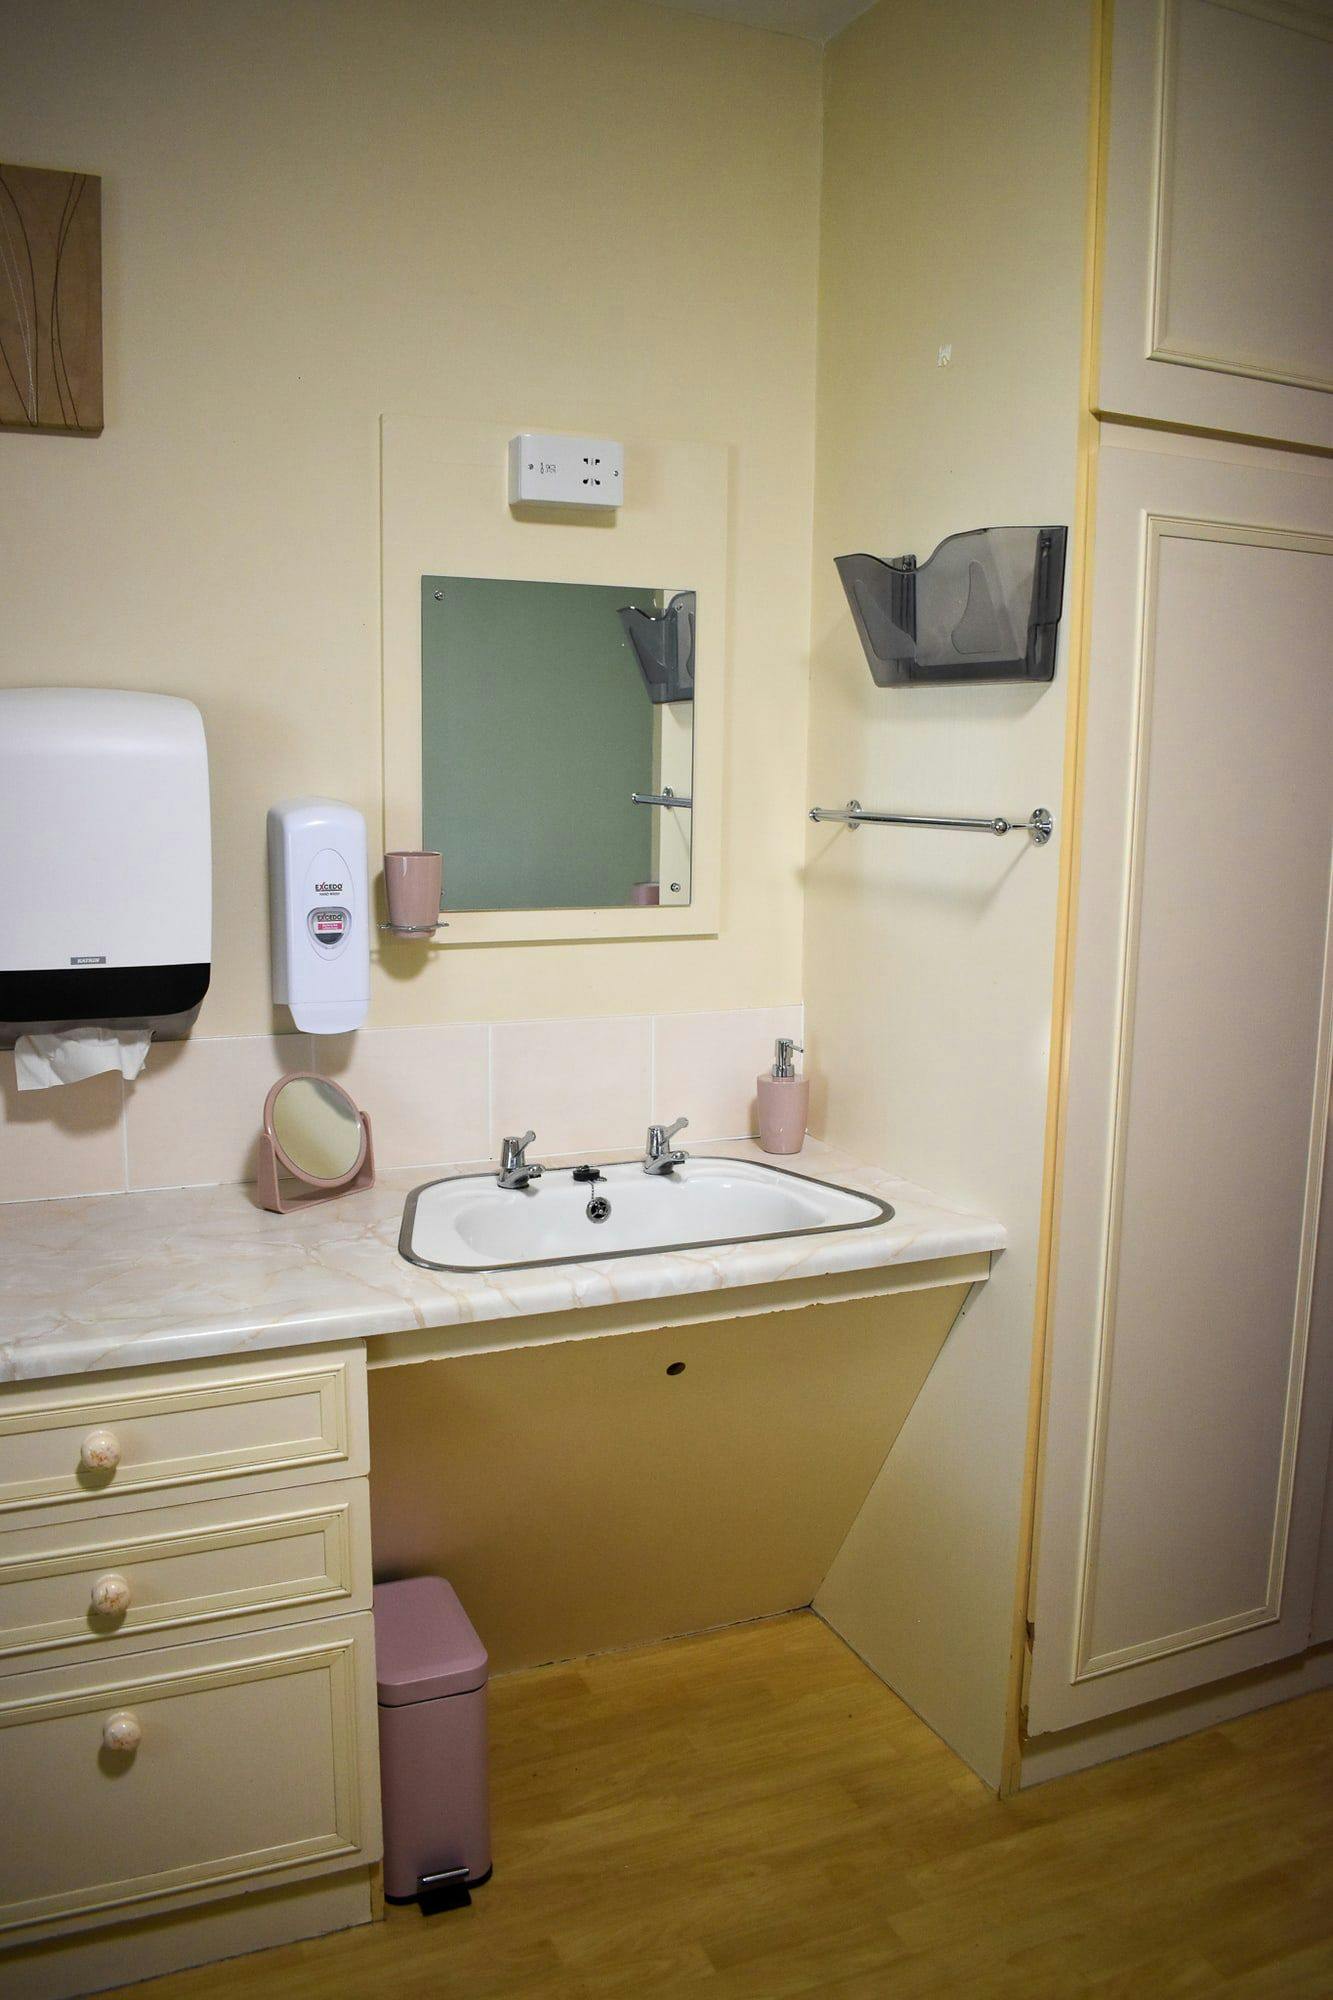 bathroom at Saltshouse Have Care Home, Hull 